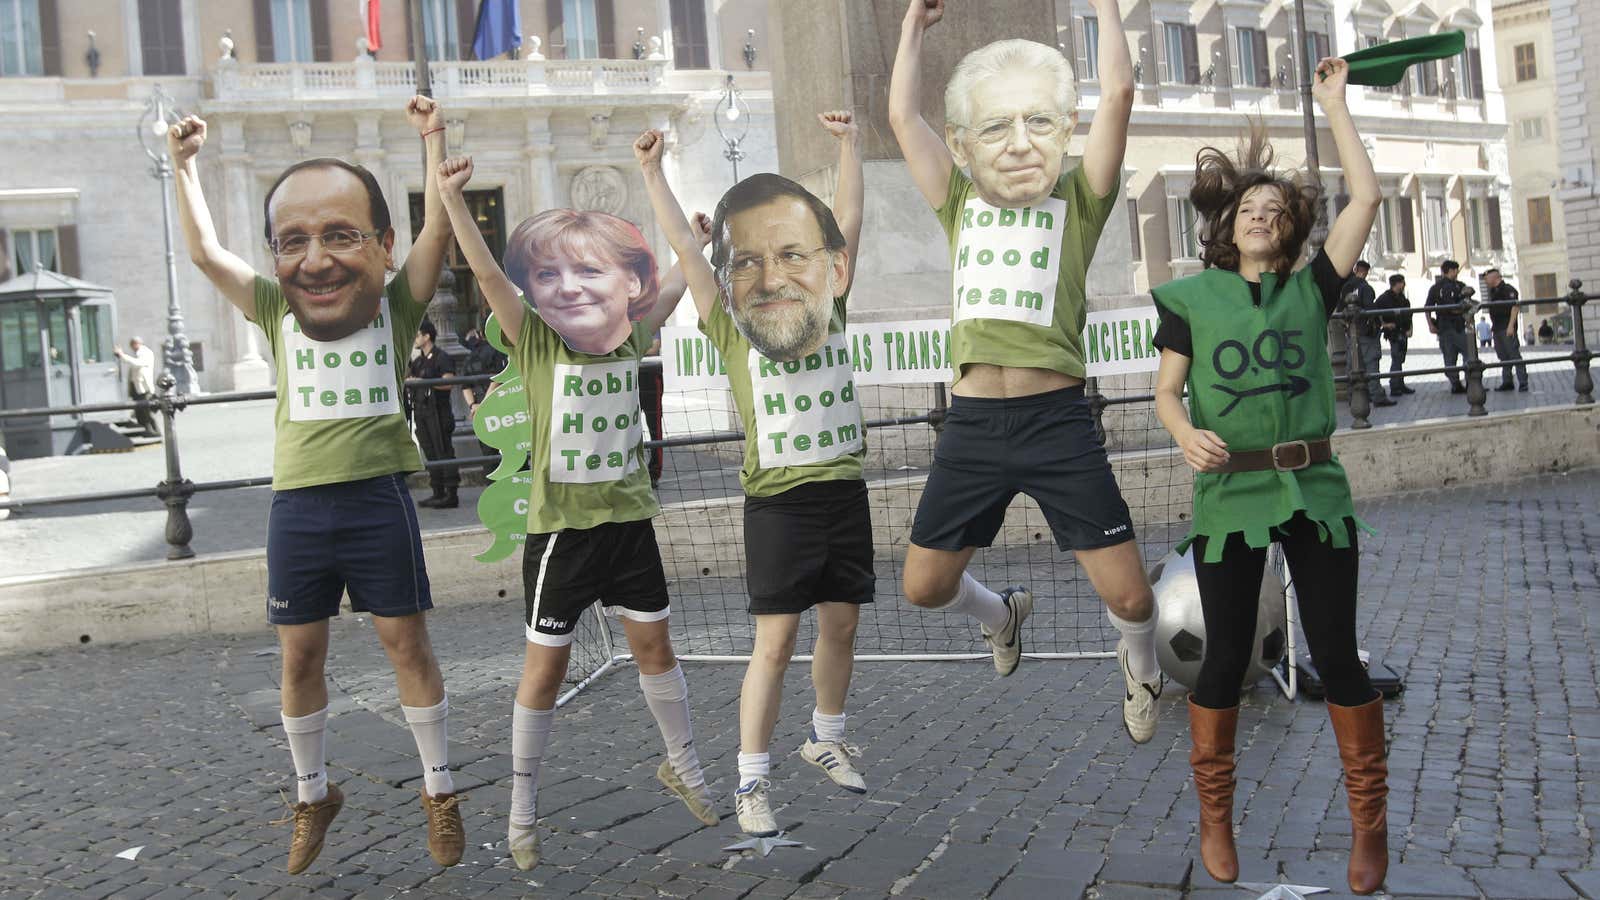 Germany, France, Italy and Spain all support  the &quot;Robin Hood tax.&quot;